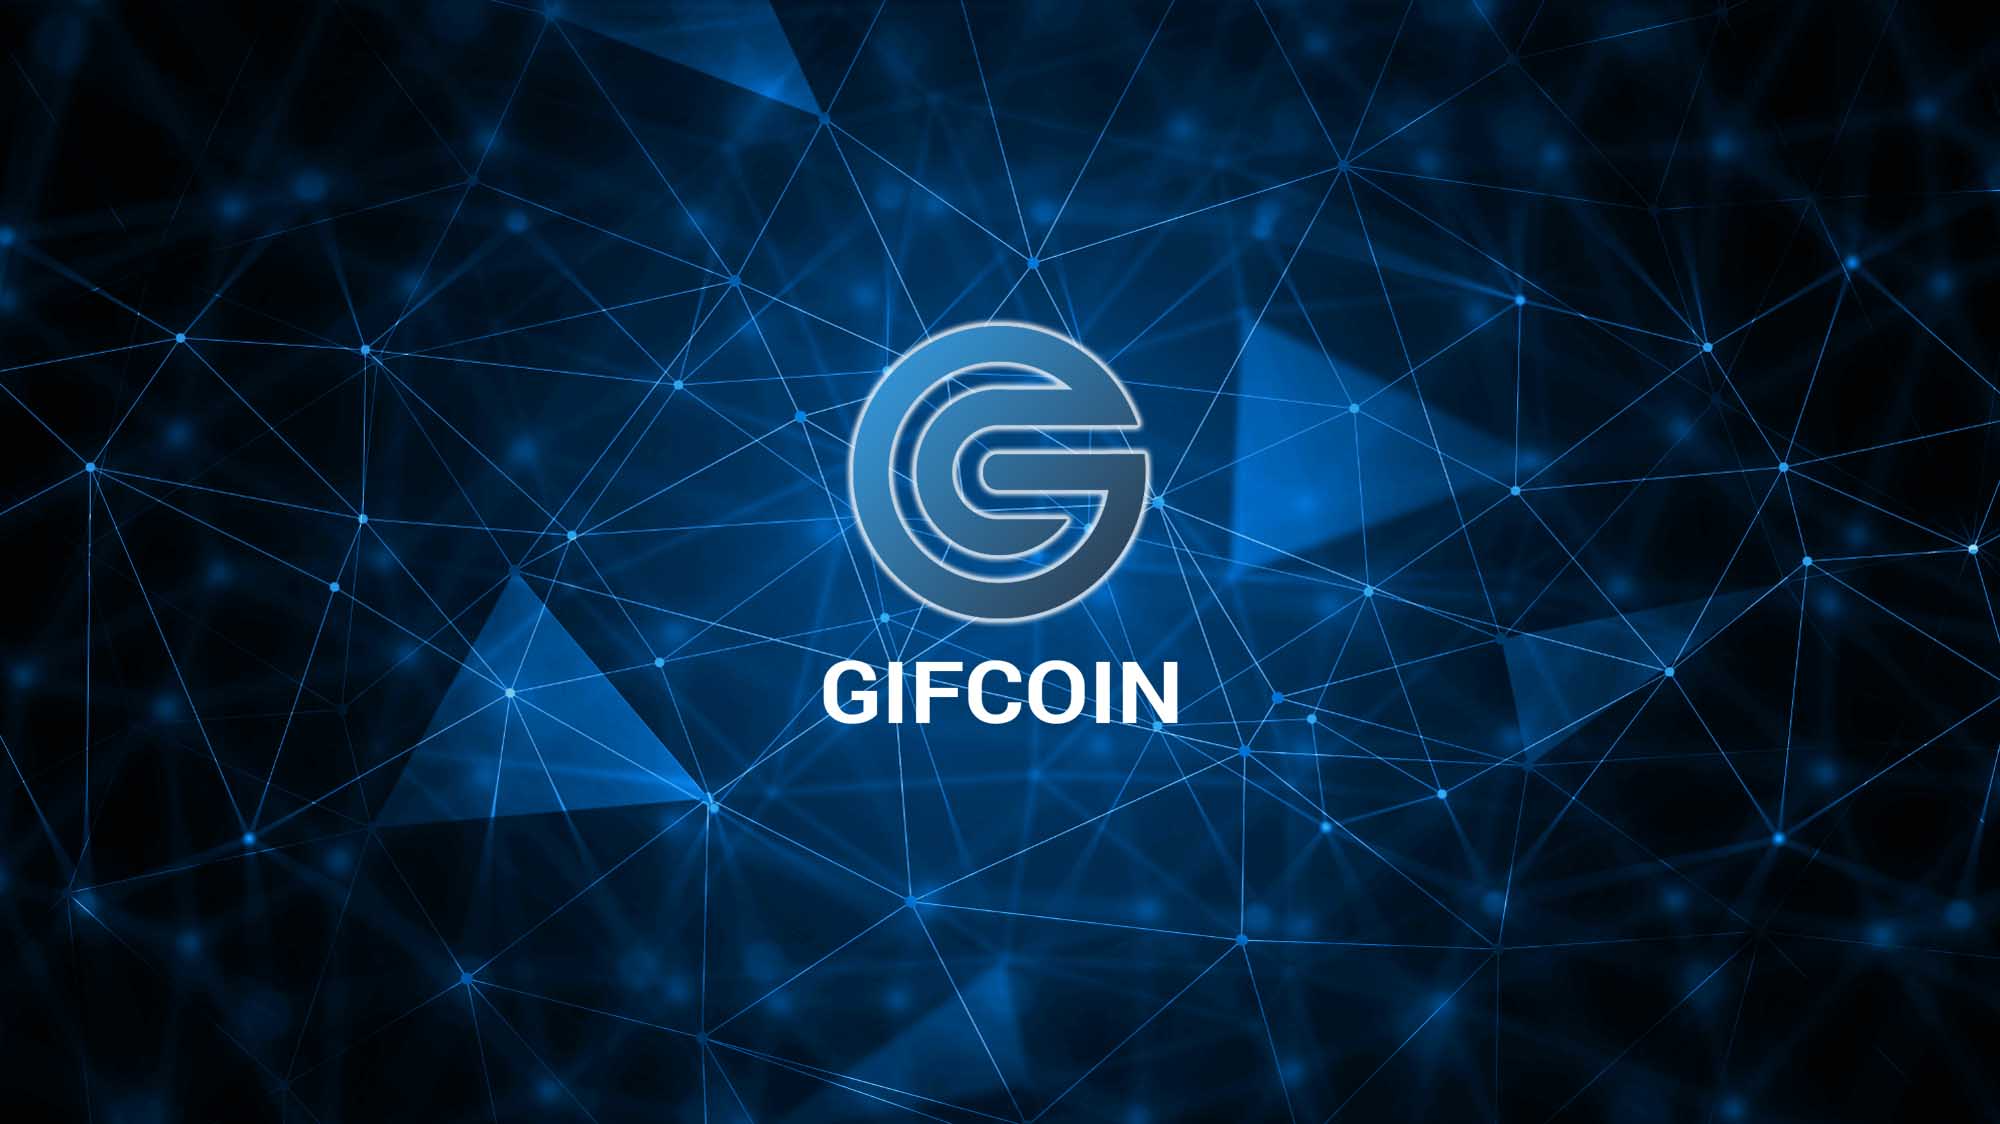 GIFcoin Shares Profits from Online Betting Through Successful VitalBet Platform